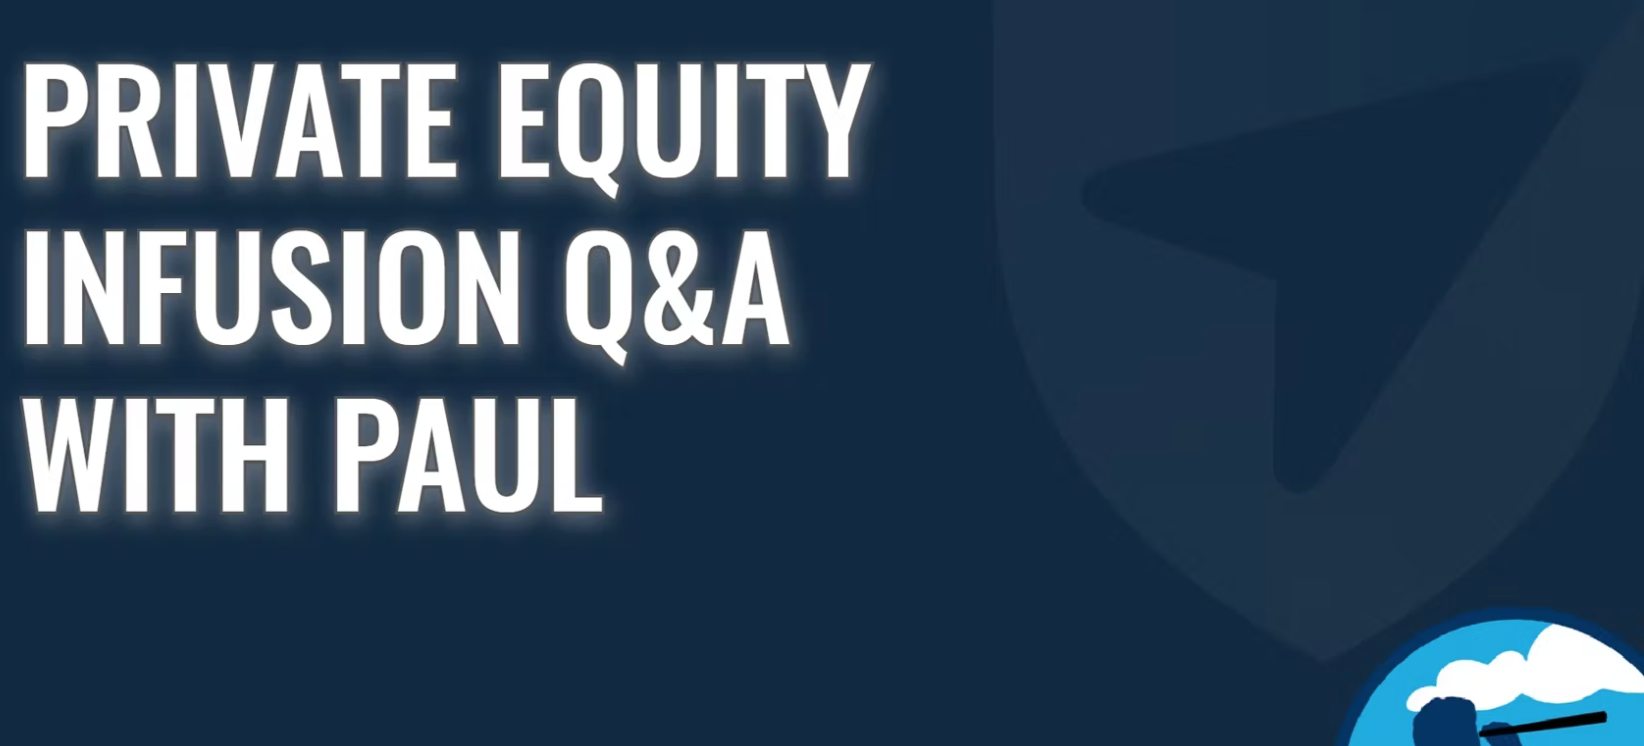 Ask Paul - A Look Into The Future Episode 75 - Private Equity Infusion Q&A with Paul